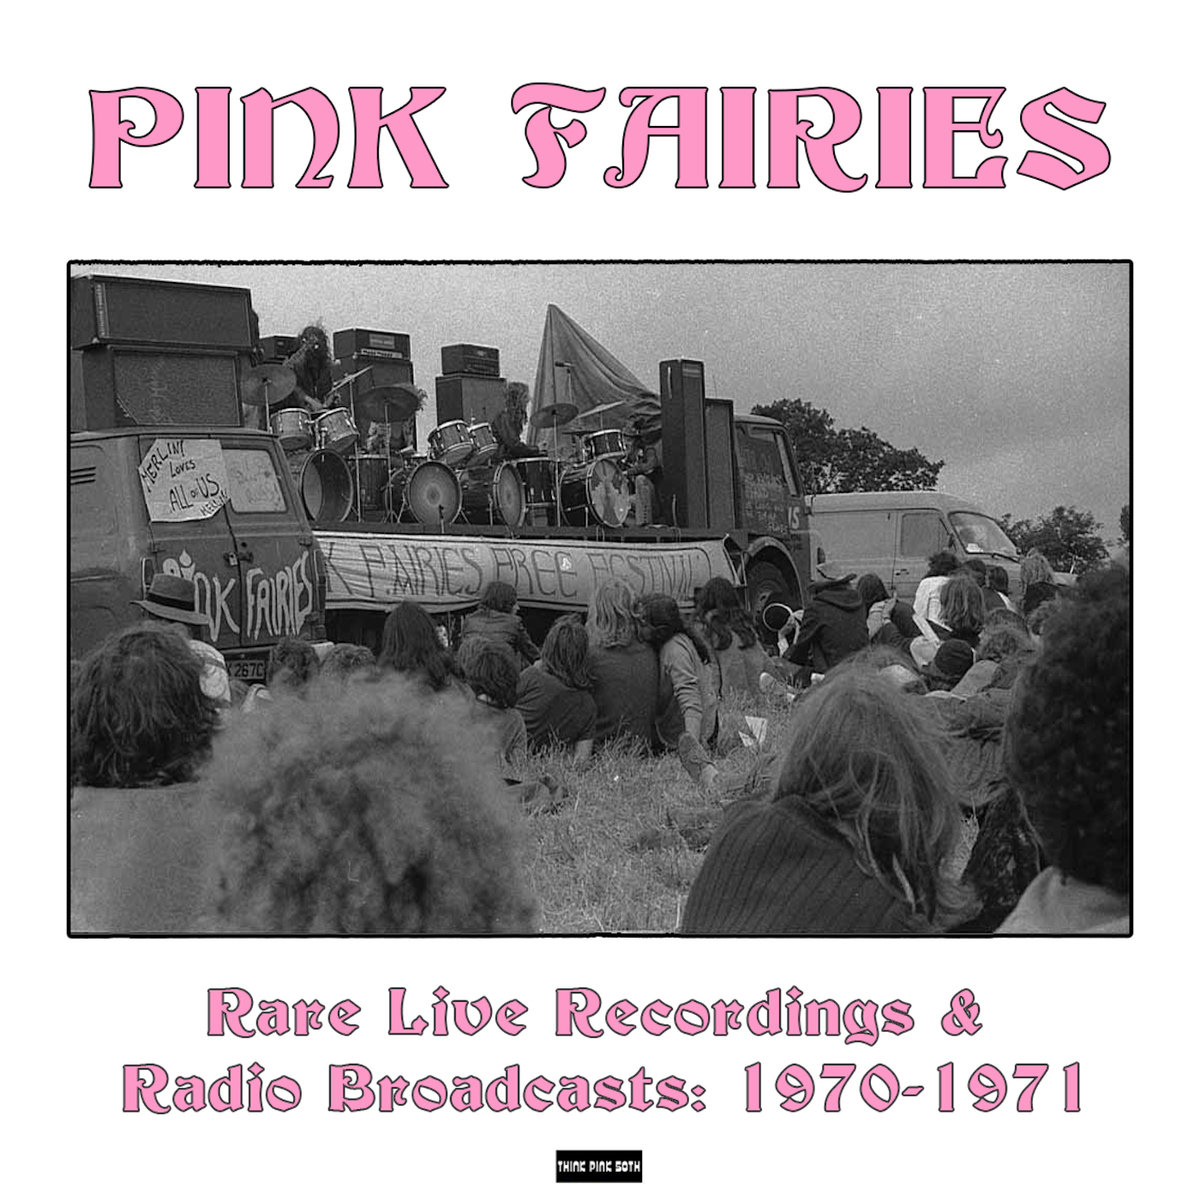 PINK FAIRIES / ピンク・フェアリーズ / RARE LIVE RECORDINGS & RADIO BROADCASTS: 1970 - 1971